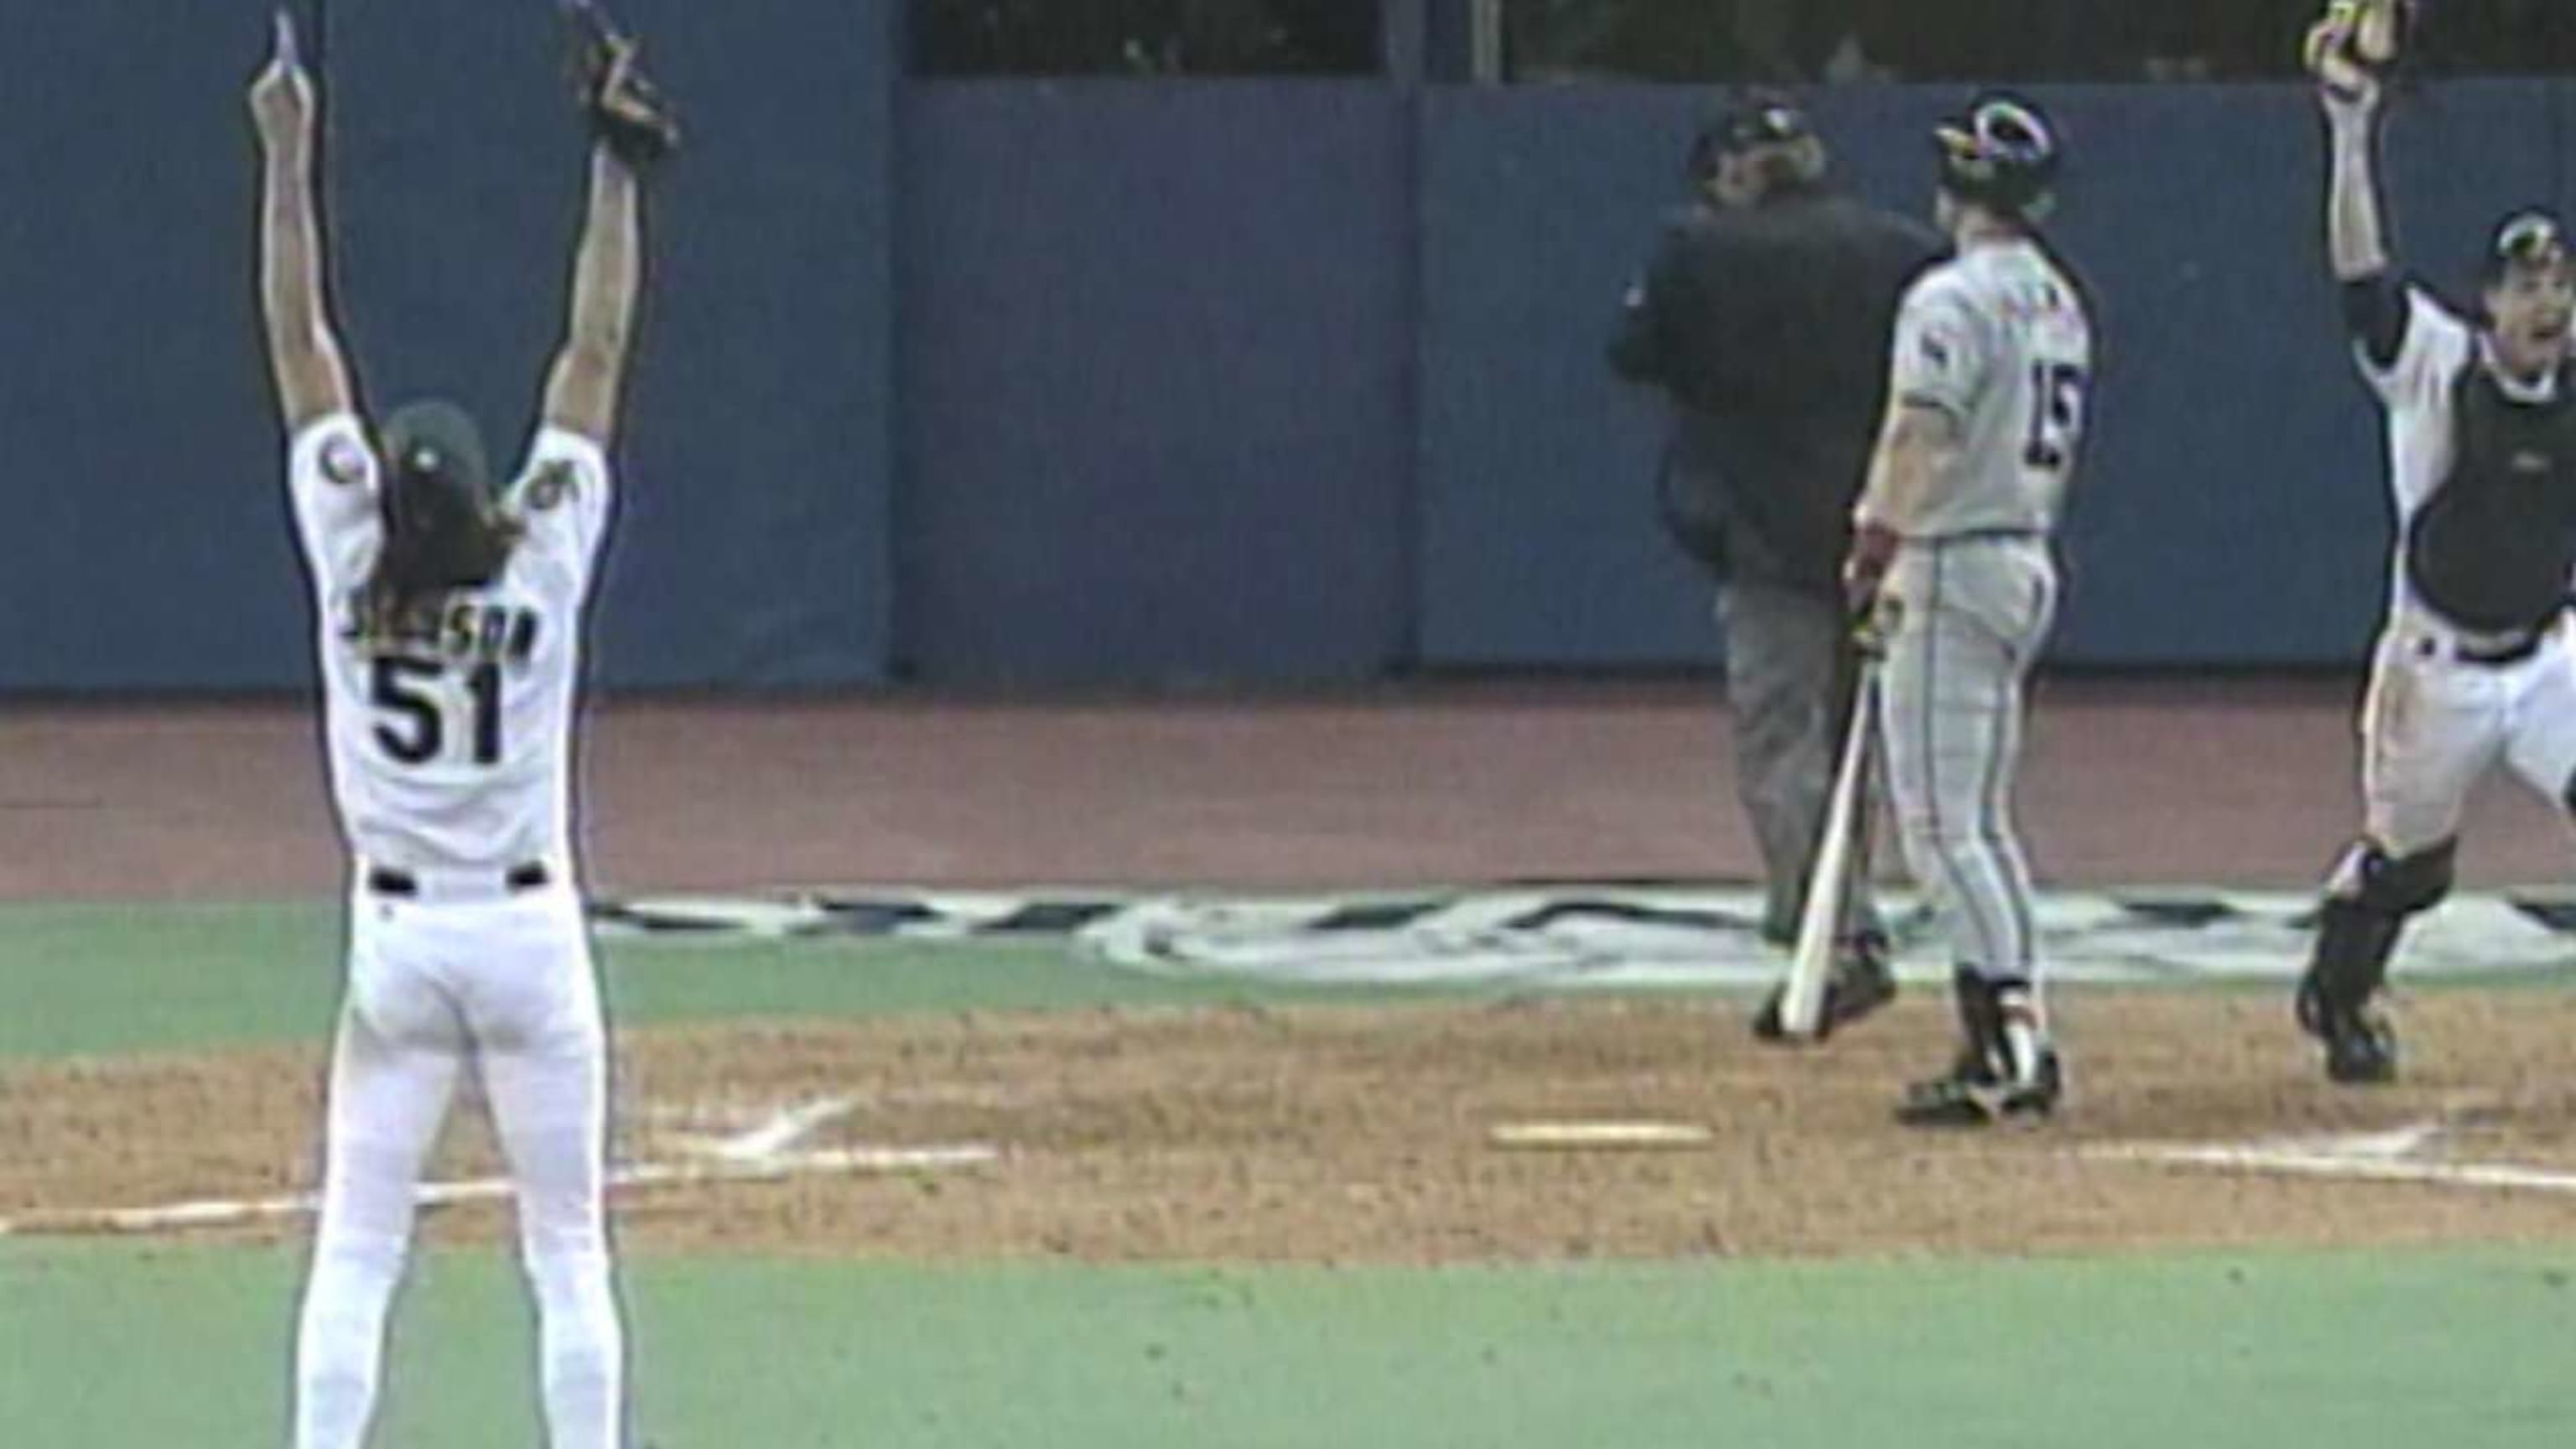 Audio: Collection of Randy Johnson's greatest moments with the